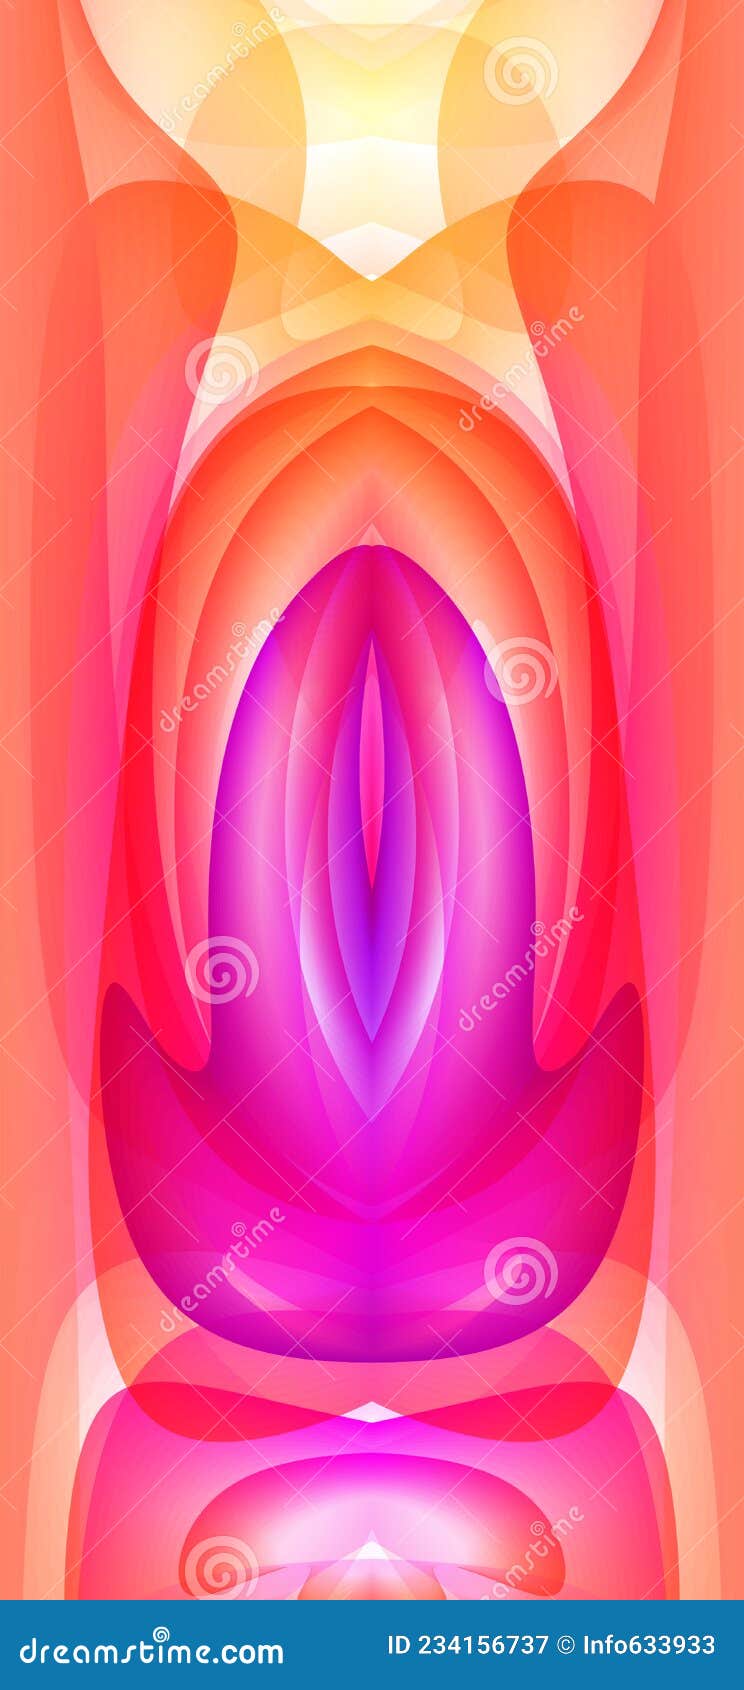 abstract colorfull lines and s imitating female vagina. visual allegories, metaphors